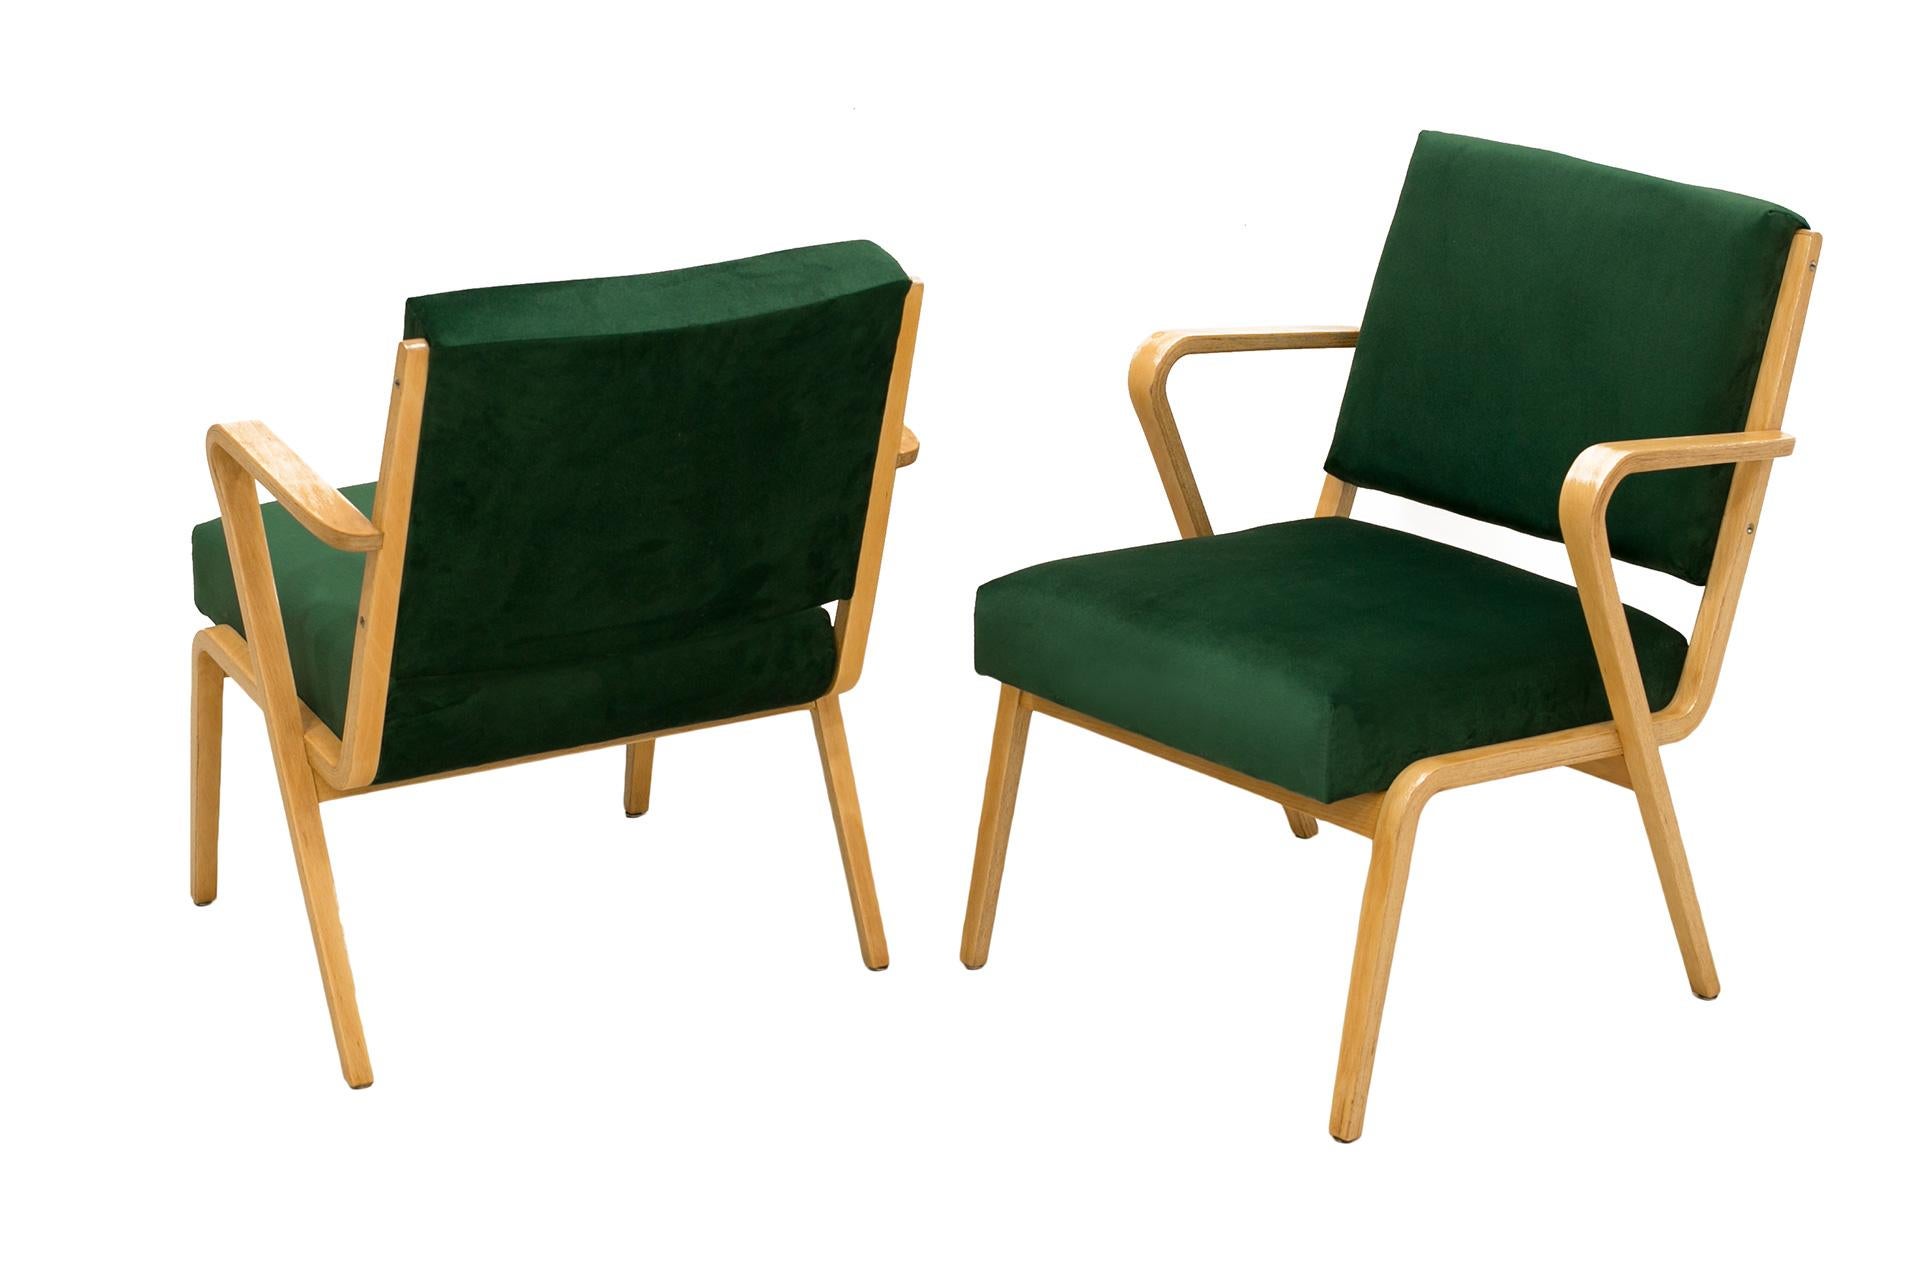 The designer of the pair of armchairs was the German Bosnian architect Selman Selmanagic. The 53693 model was designed in 1957 for the German company Deutsche Werkstätten Hellerau. The piece was professionally renovated and reupholstered. The wooden